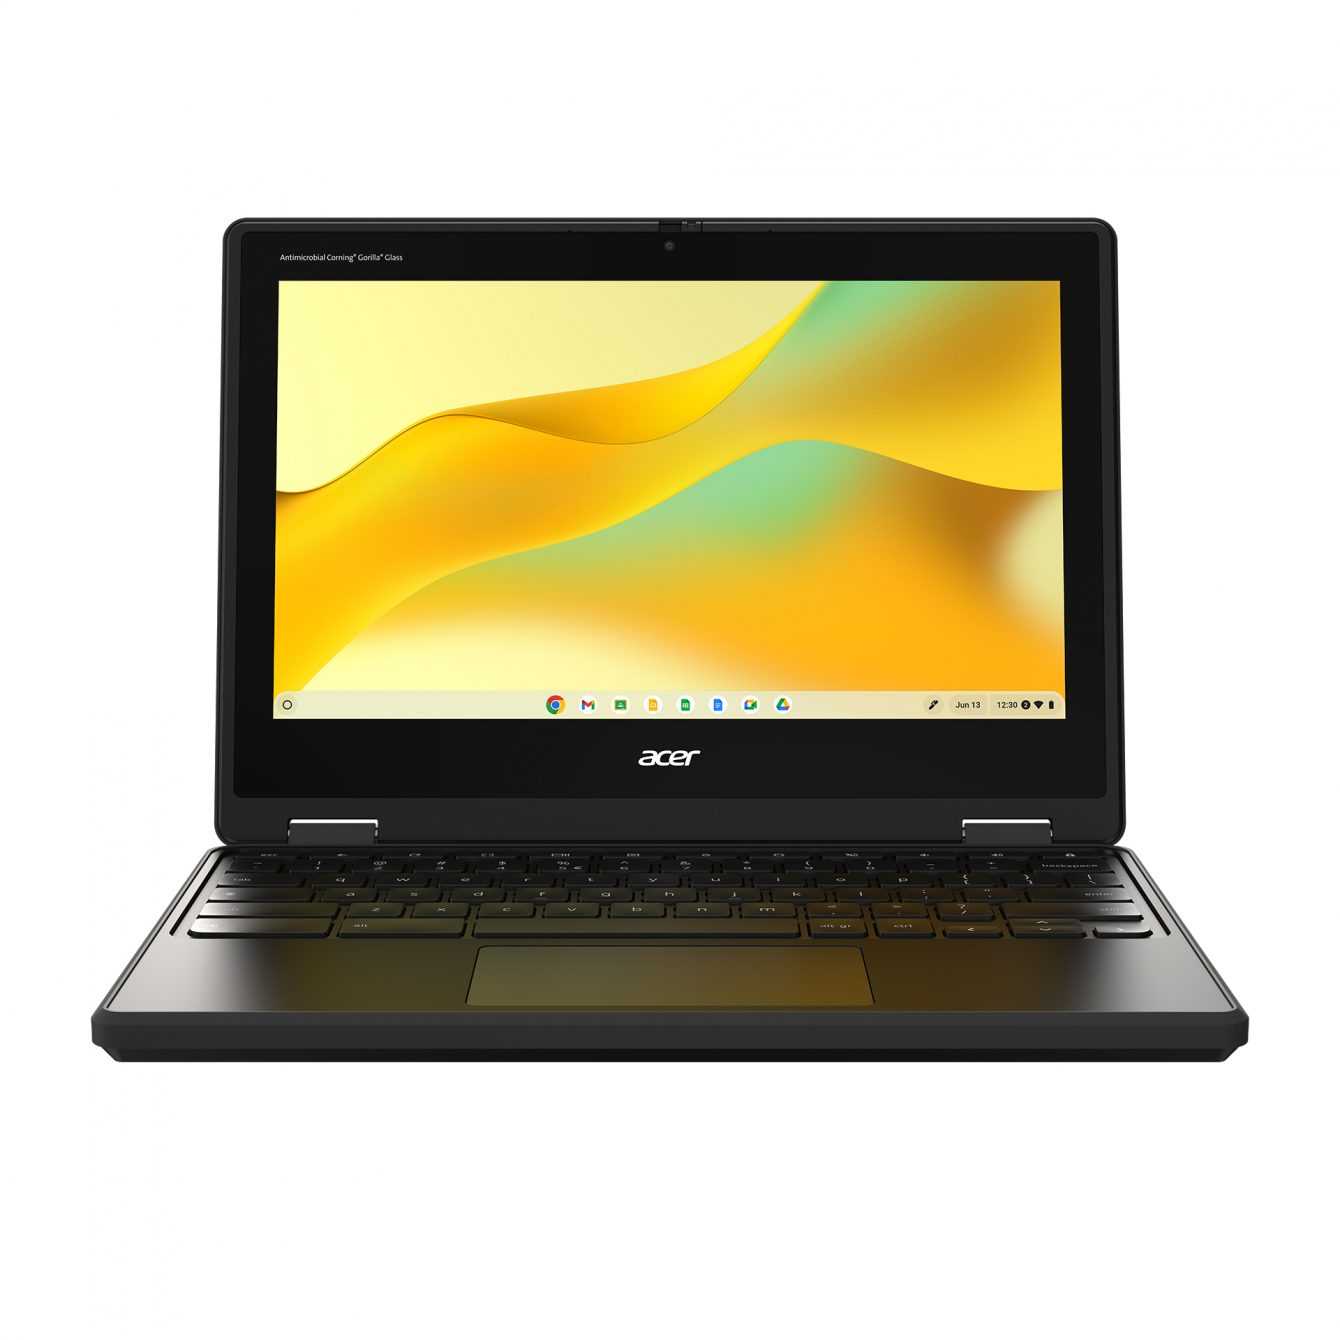 Acer TravelMate: these are the brand's new rugged notebooks